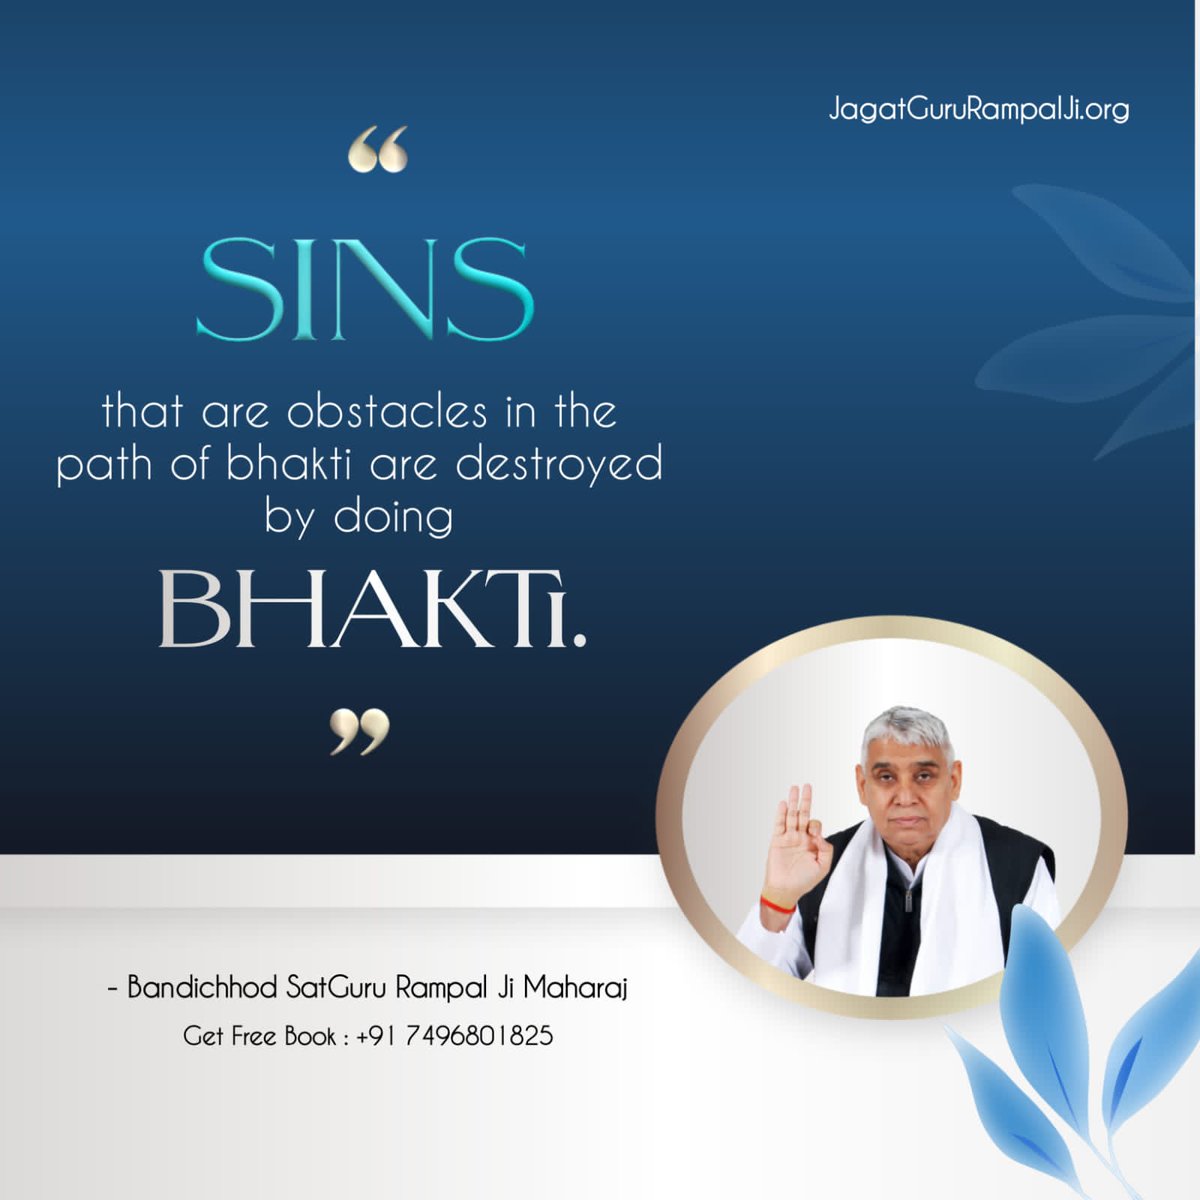 #GodMorningMonday
           SINS
that are obstacles in the path of bhakti are destroyed by doing                BHAKTI.
#SaintRampalJiQuotes